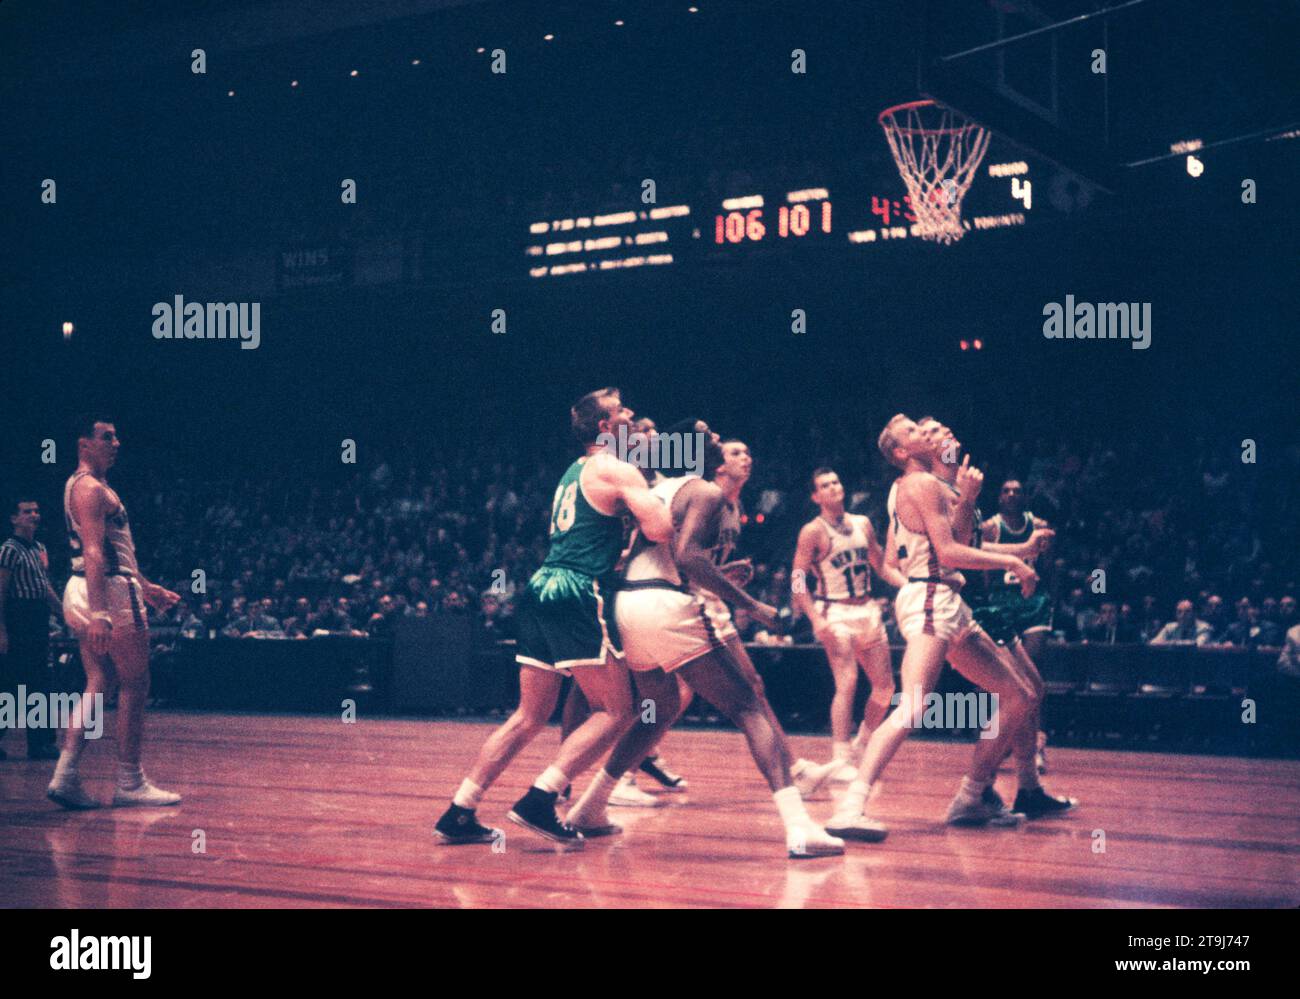 NEW YORK, NY - OCTOBER 25: Jim Loscutoff #18 of the Boston Celtics, Willie Naulls #6 and Kenny Sears #12 of the New York Knicks wait for the rebound during an NBA game on October 25, 1958 at the Madison Square Garden in New York, New York.  (Photo by Hy Peskin) *** Local Caption *** Jim Loscutoff;Willie Naulls;Kenny Sears Stock Photo